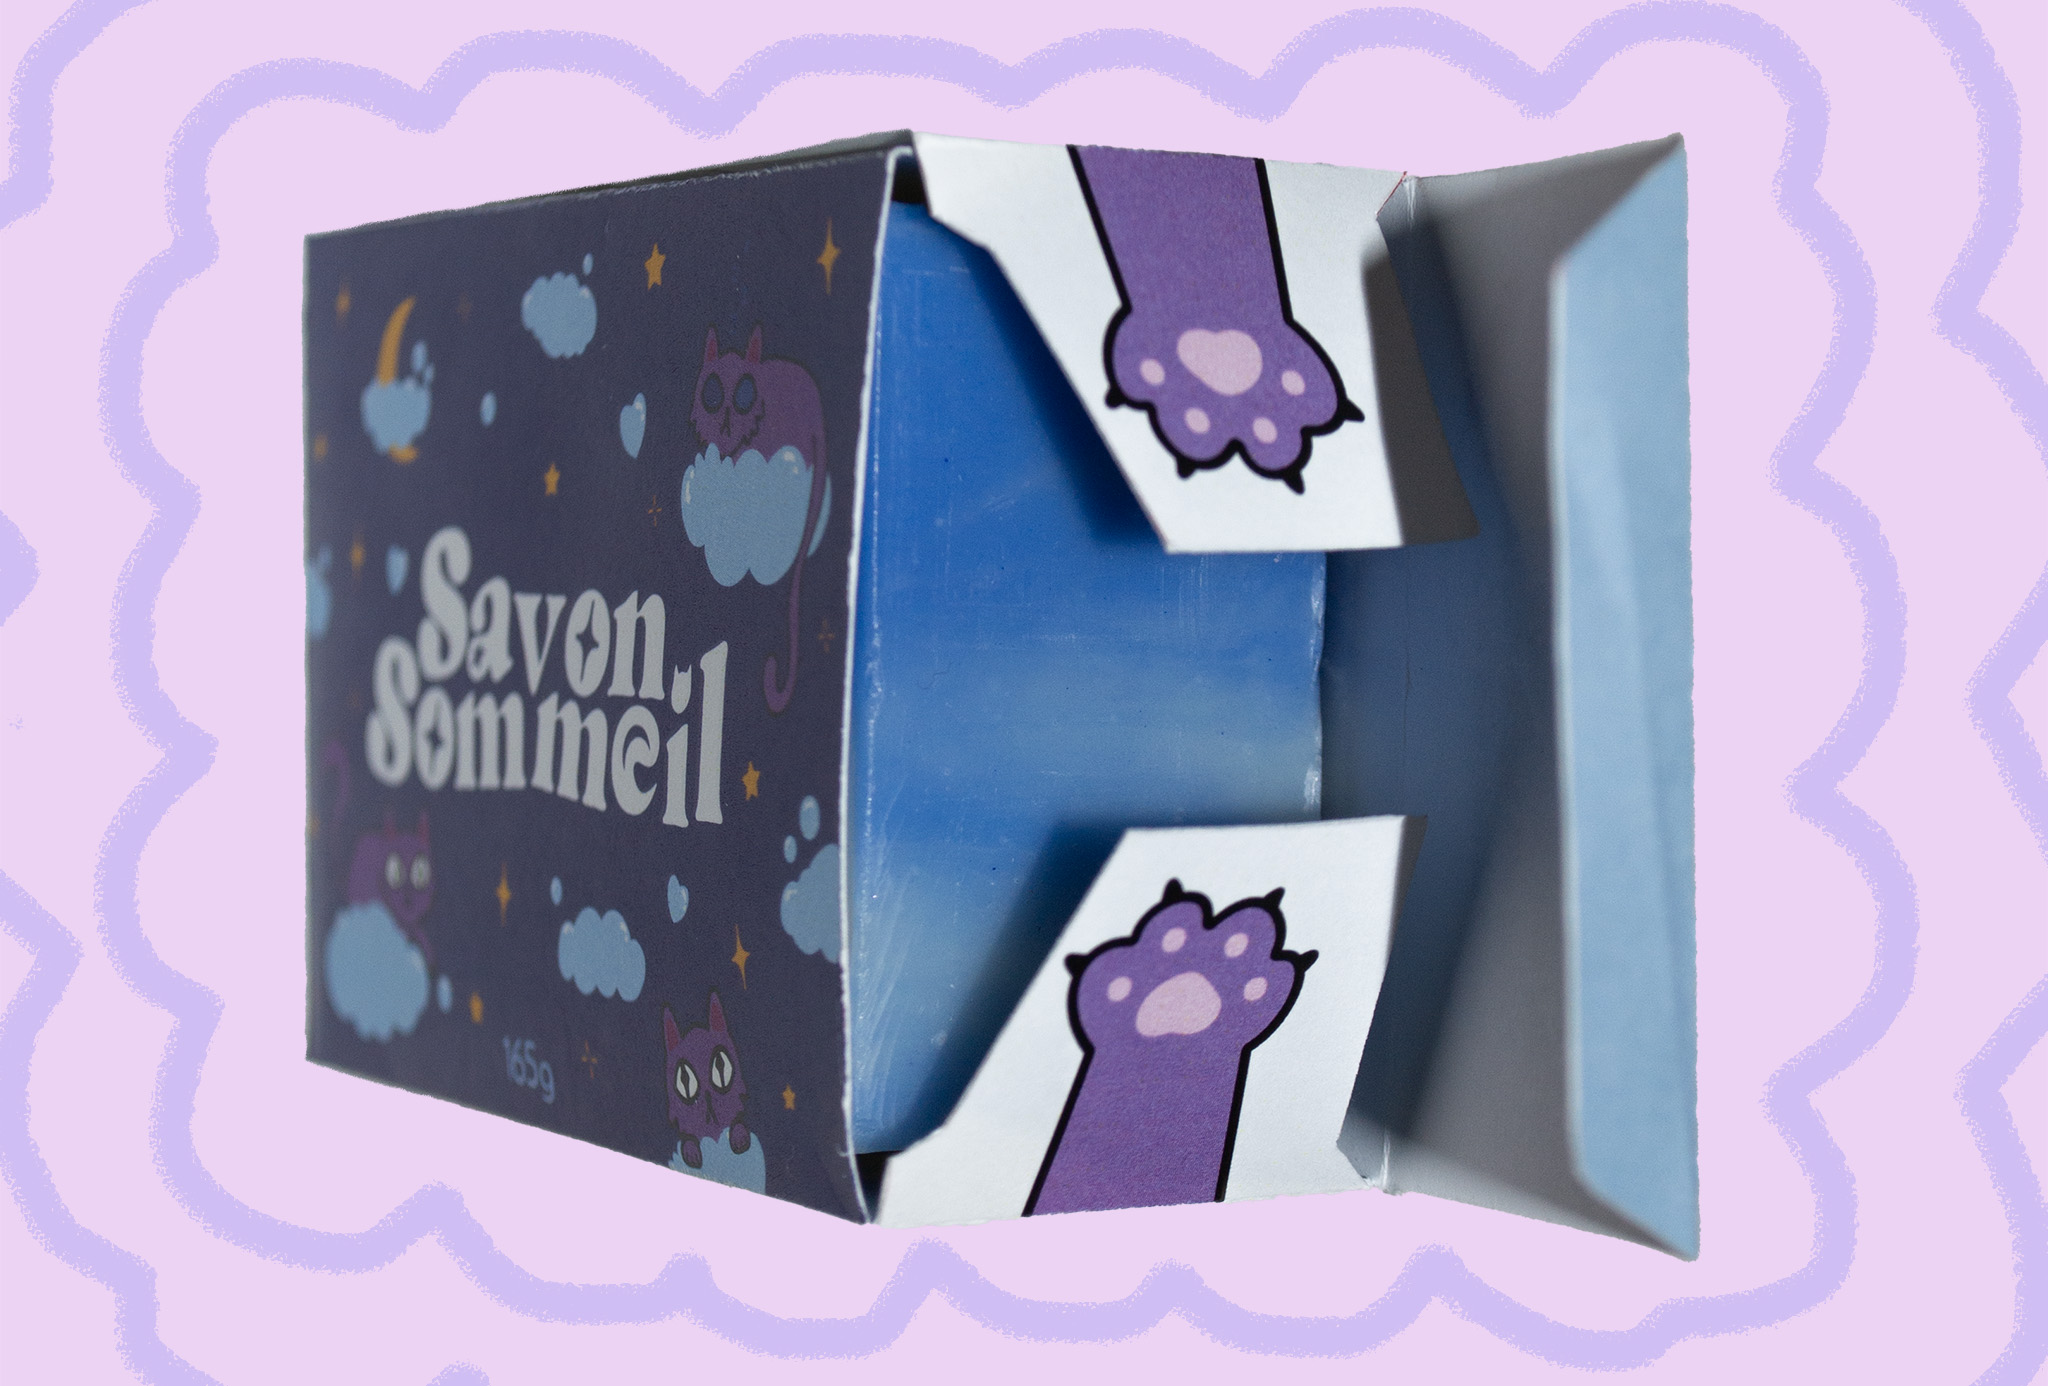 Packaging image of Savon Sommeil packaging displaying paw designs on inner flaps on a cloud style background.